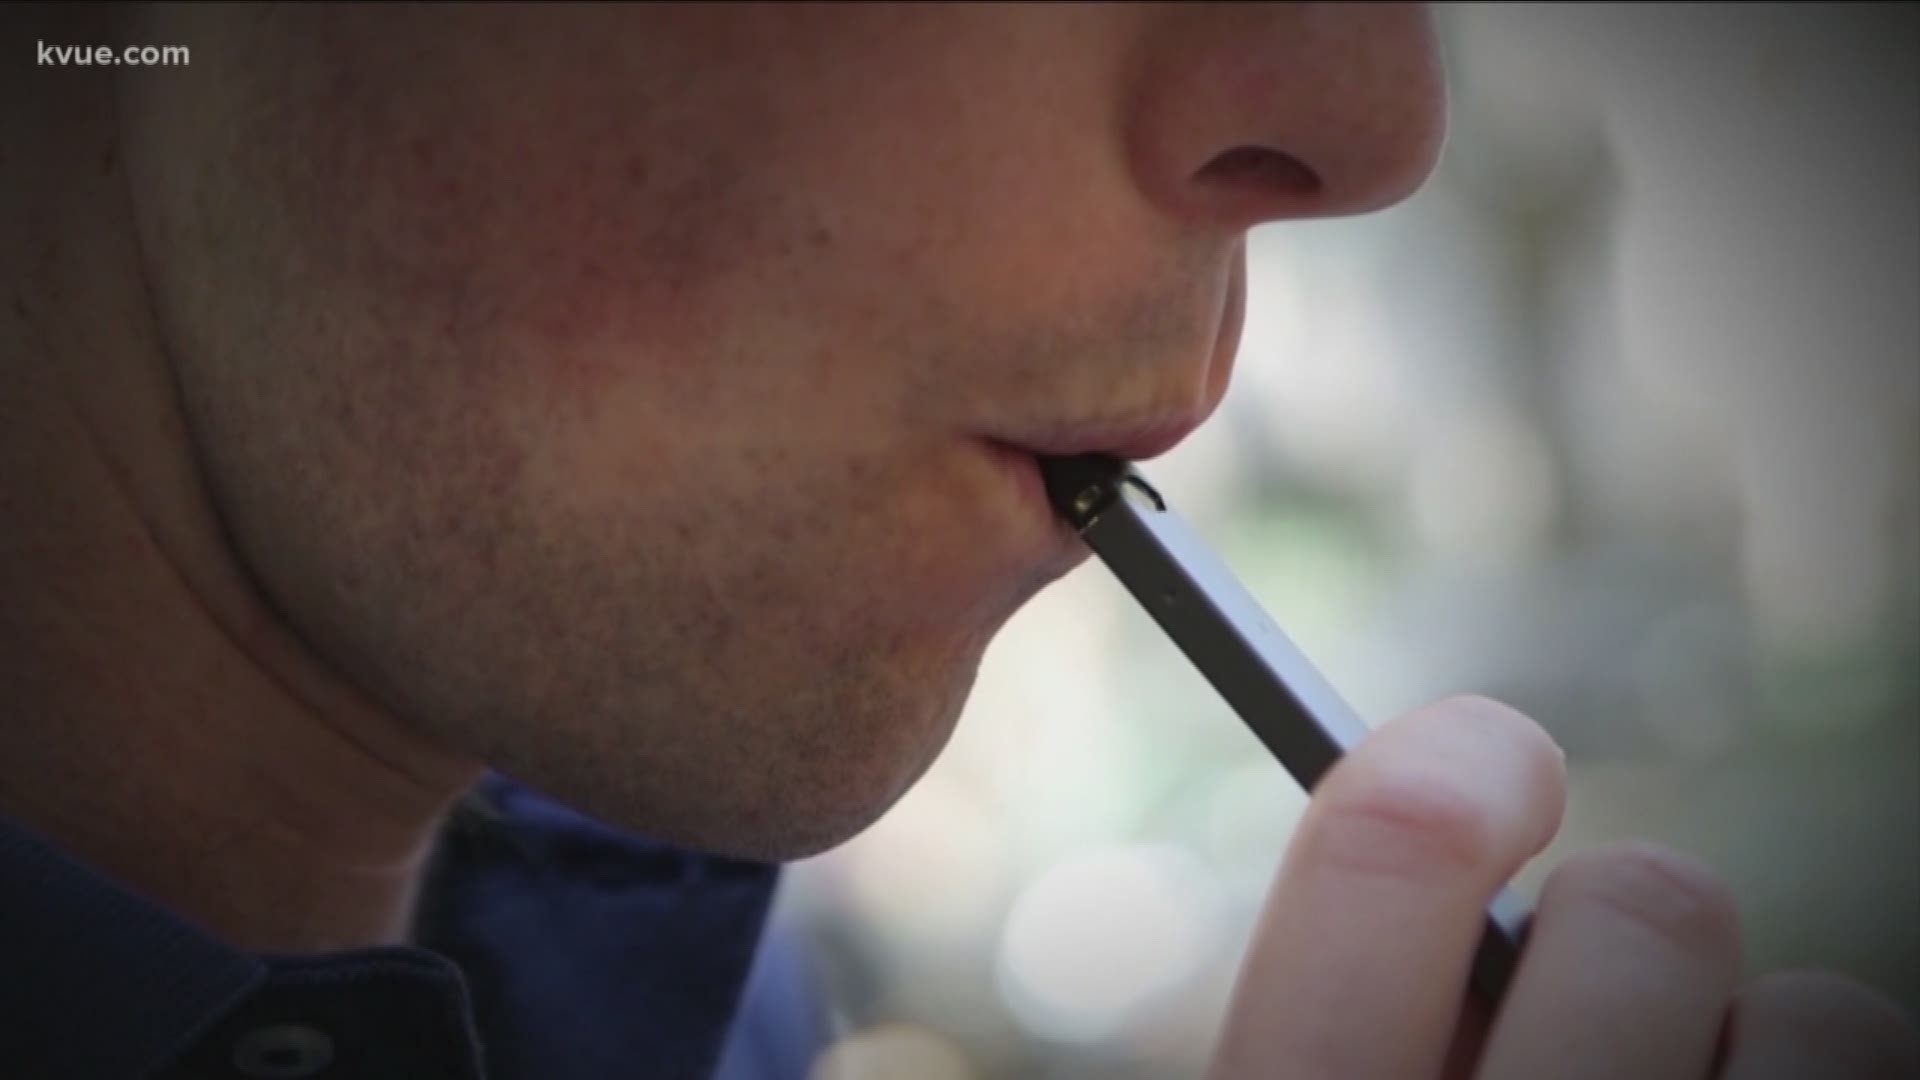 On Tuesday, State lawmakers looked at how vaping is impacting minors in Texas.